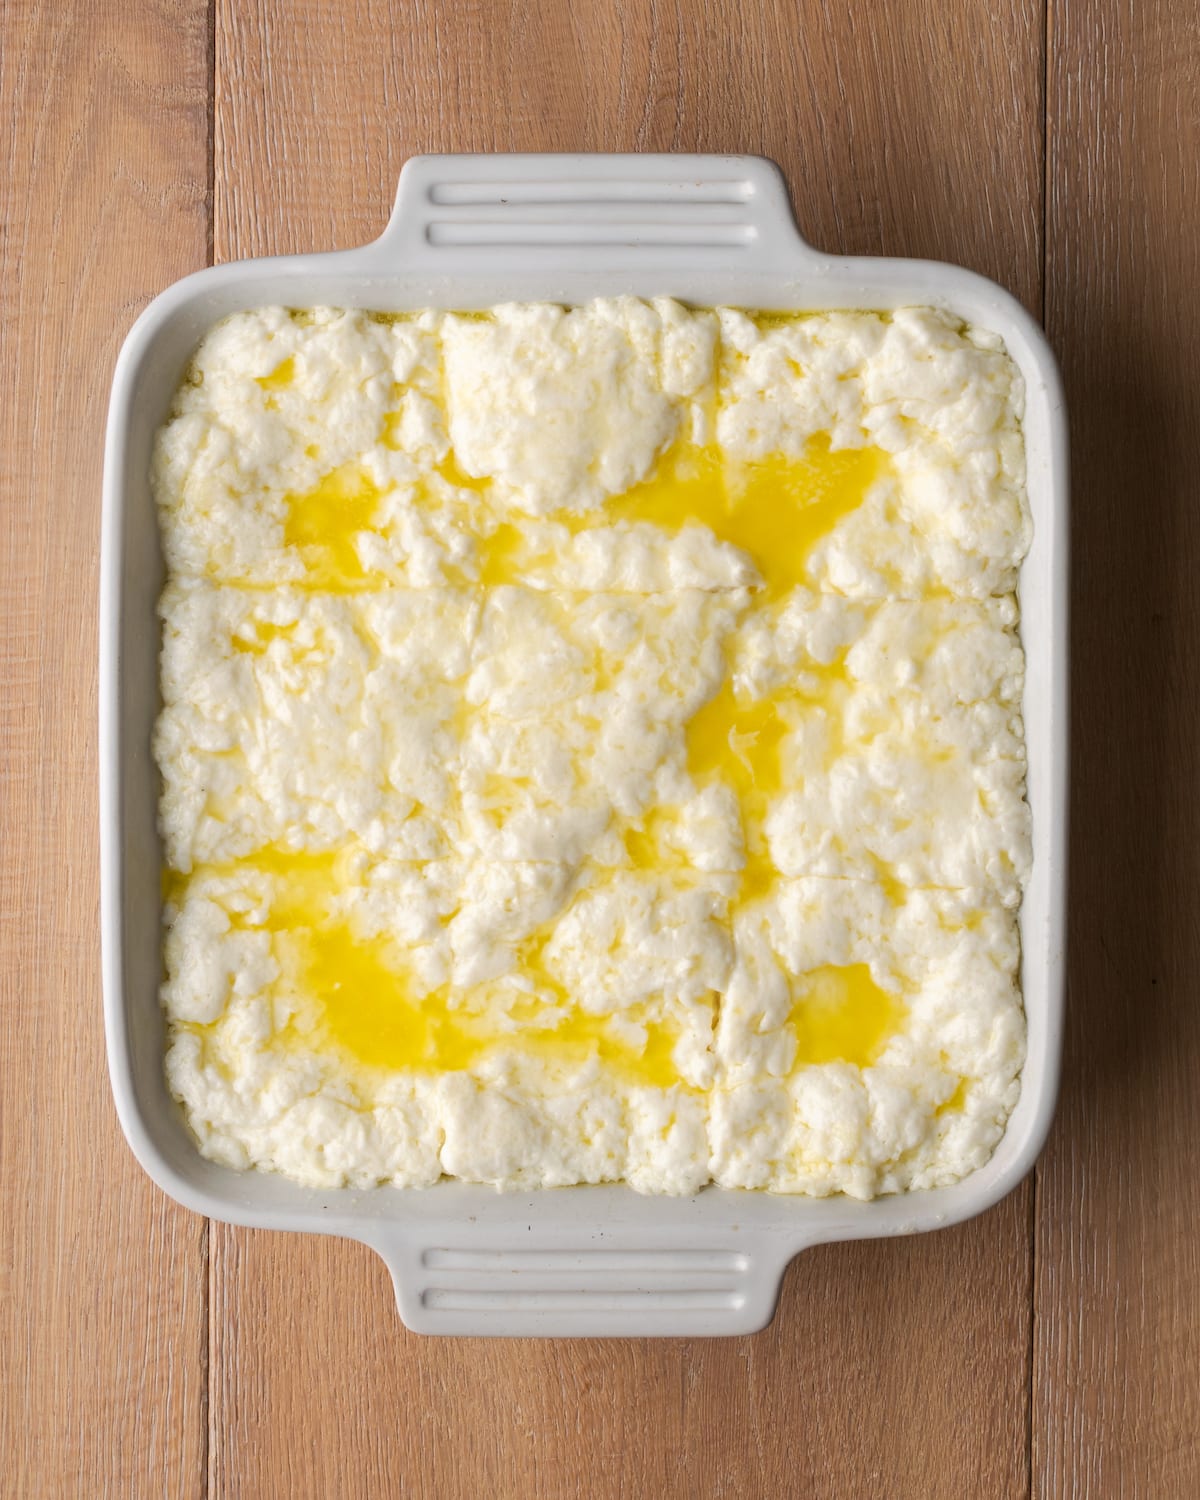 Butter swim biscuit batter in a square baking dish topped with more melted butter.